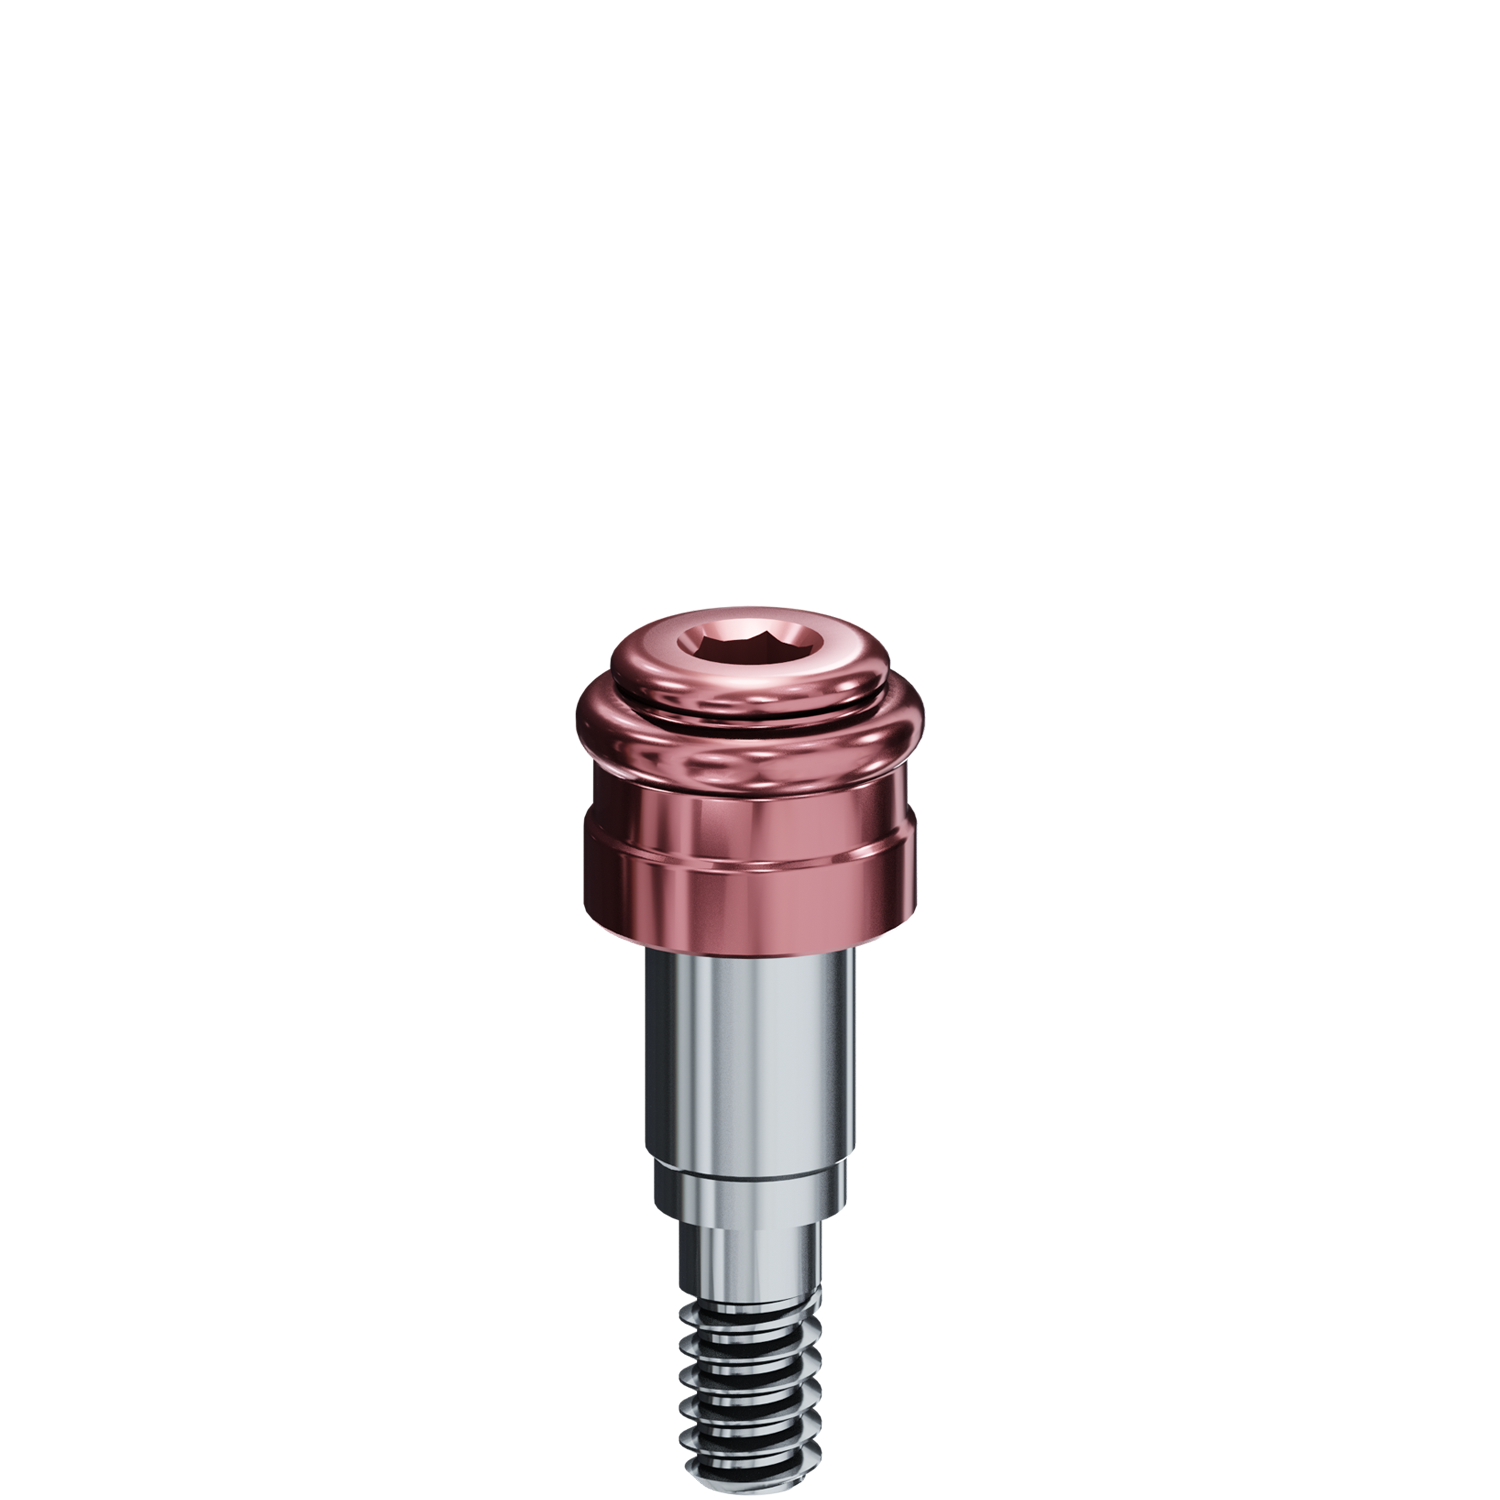 R-Tx Attachment System - 3.4mm Biomet 3i® Certain Connection - 048" Drive - 1.0mm